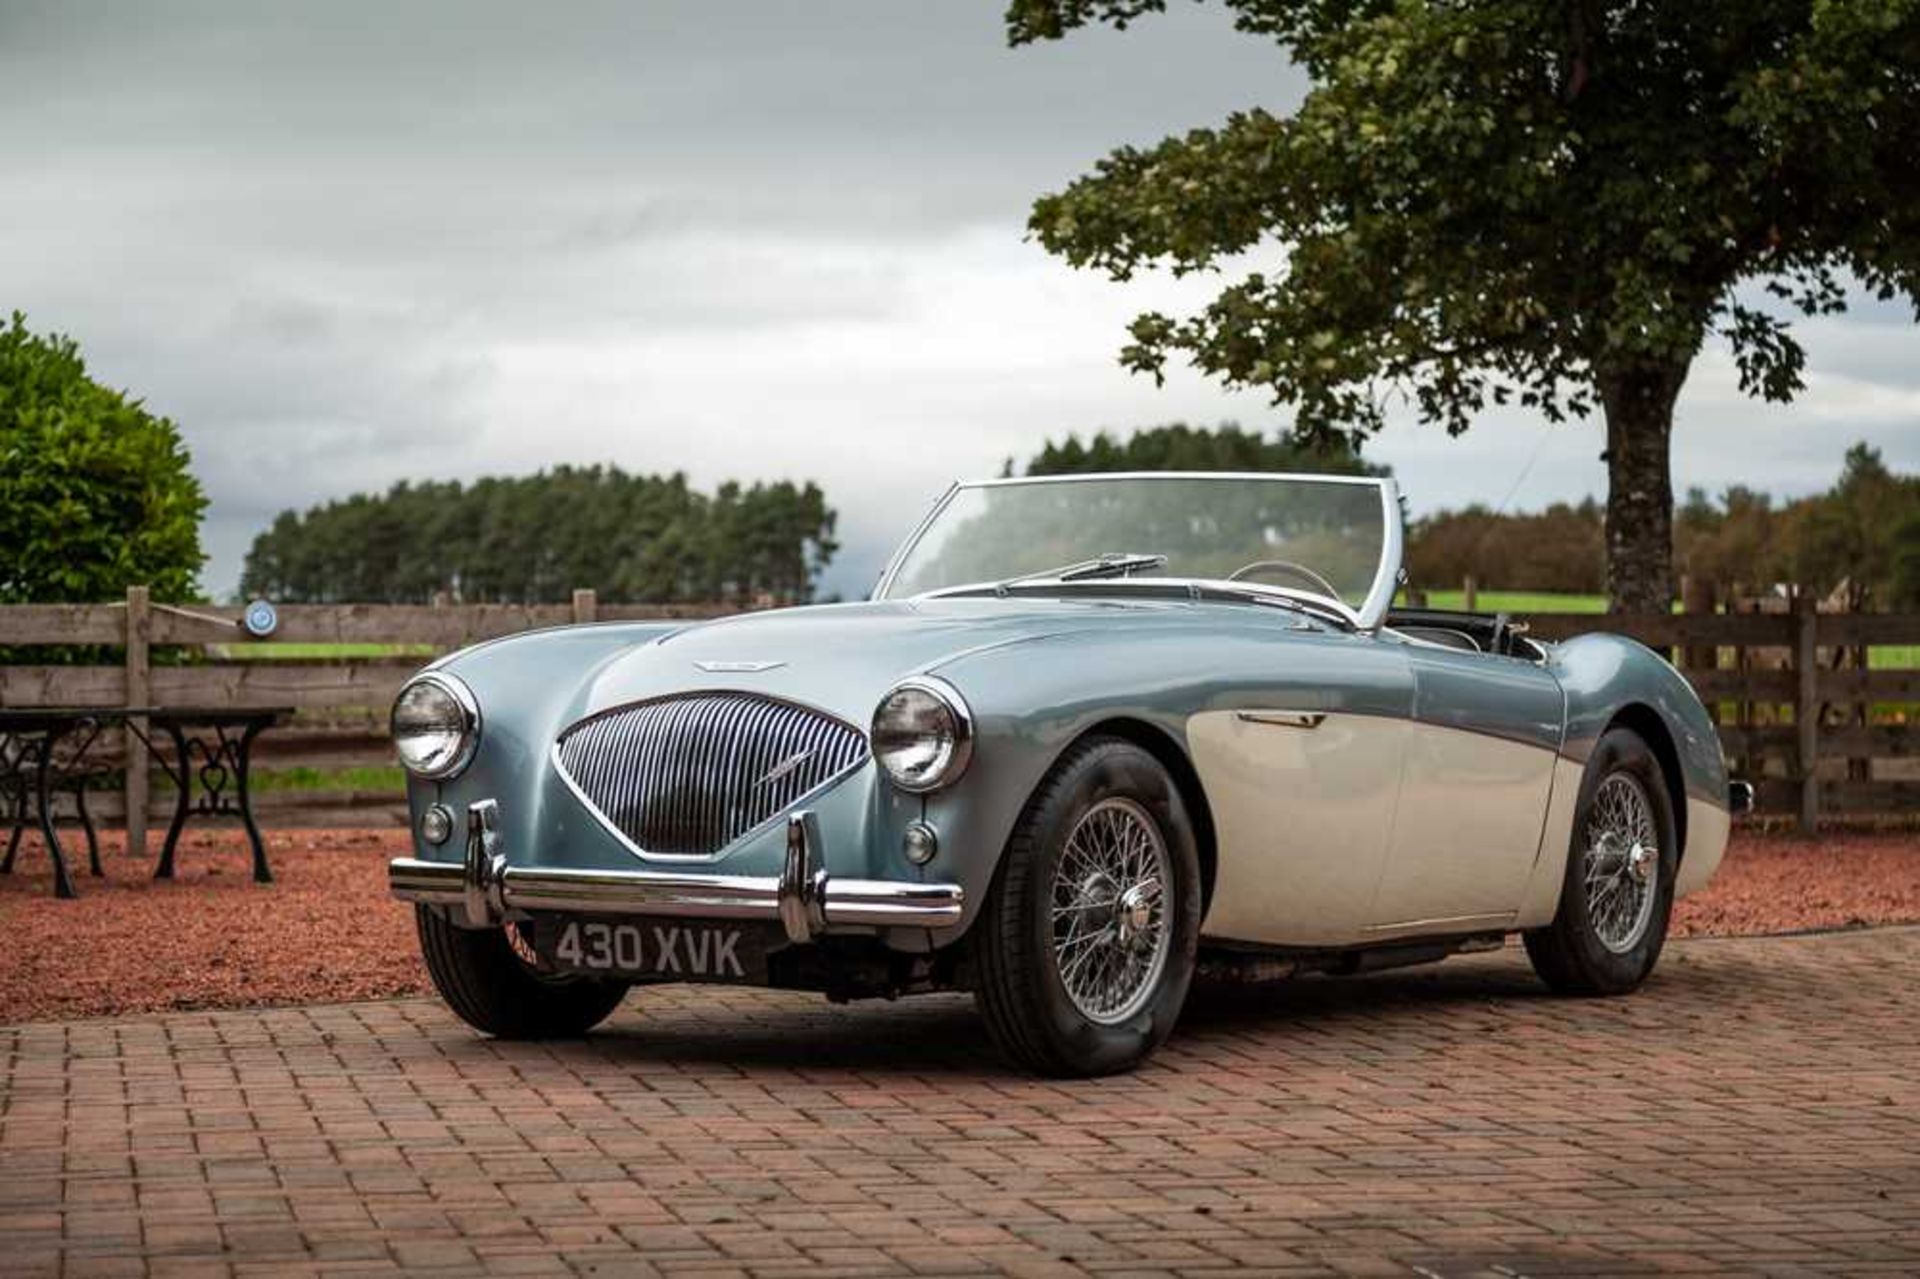 1955 Austin-Healey 100/4 Subtly Upgraded with 5-Speed Transmission and Front Disc Brakes - Image 14 of 54